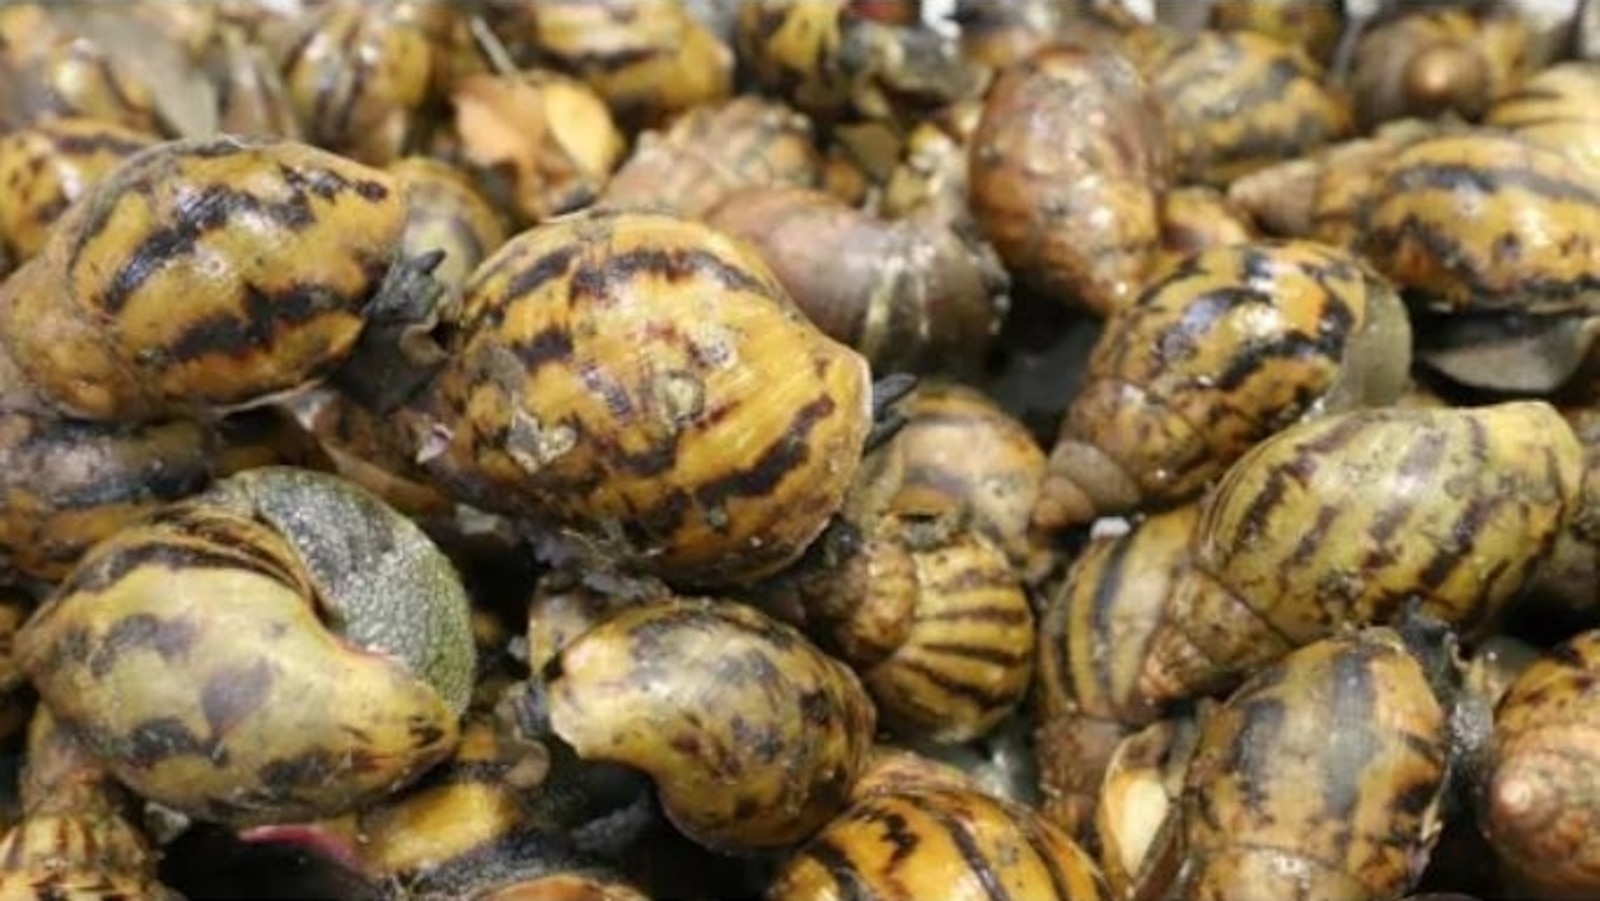 90 Giant African Land Snails found in passenger's bag at Detroit airport